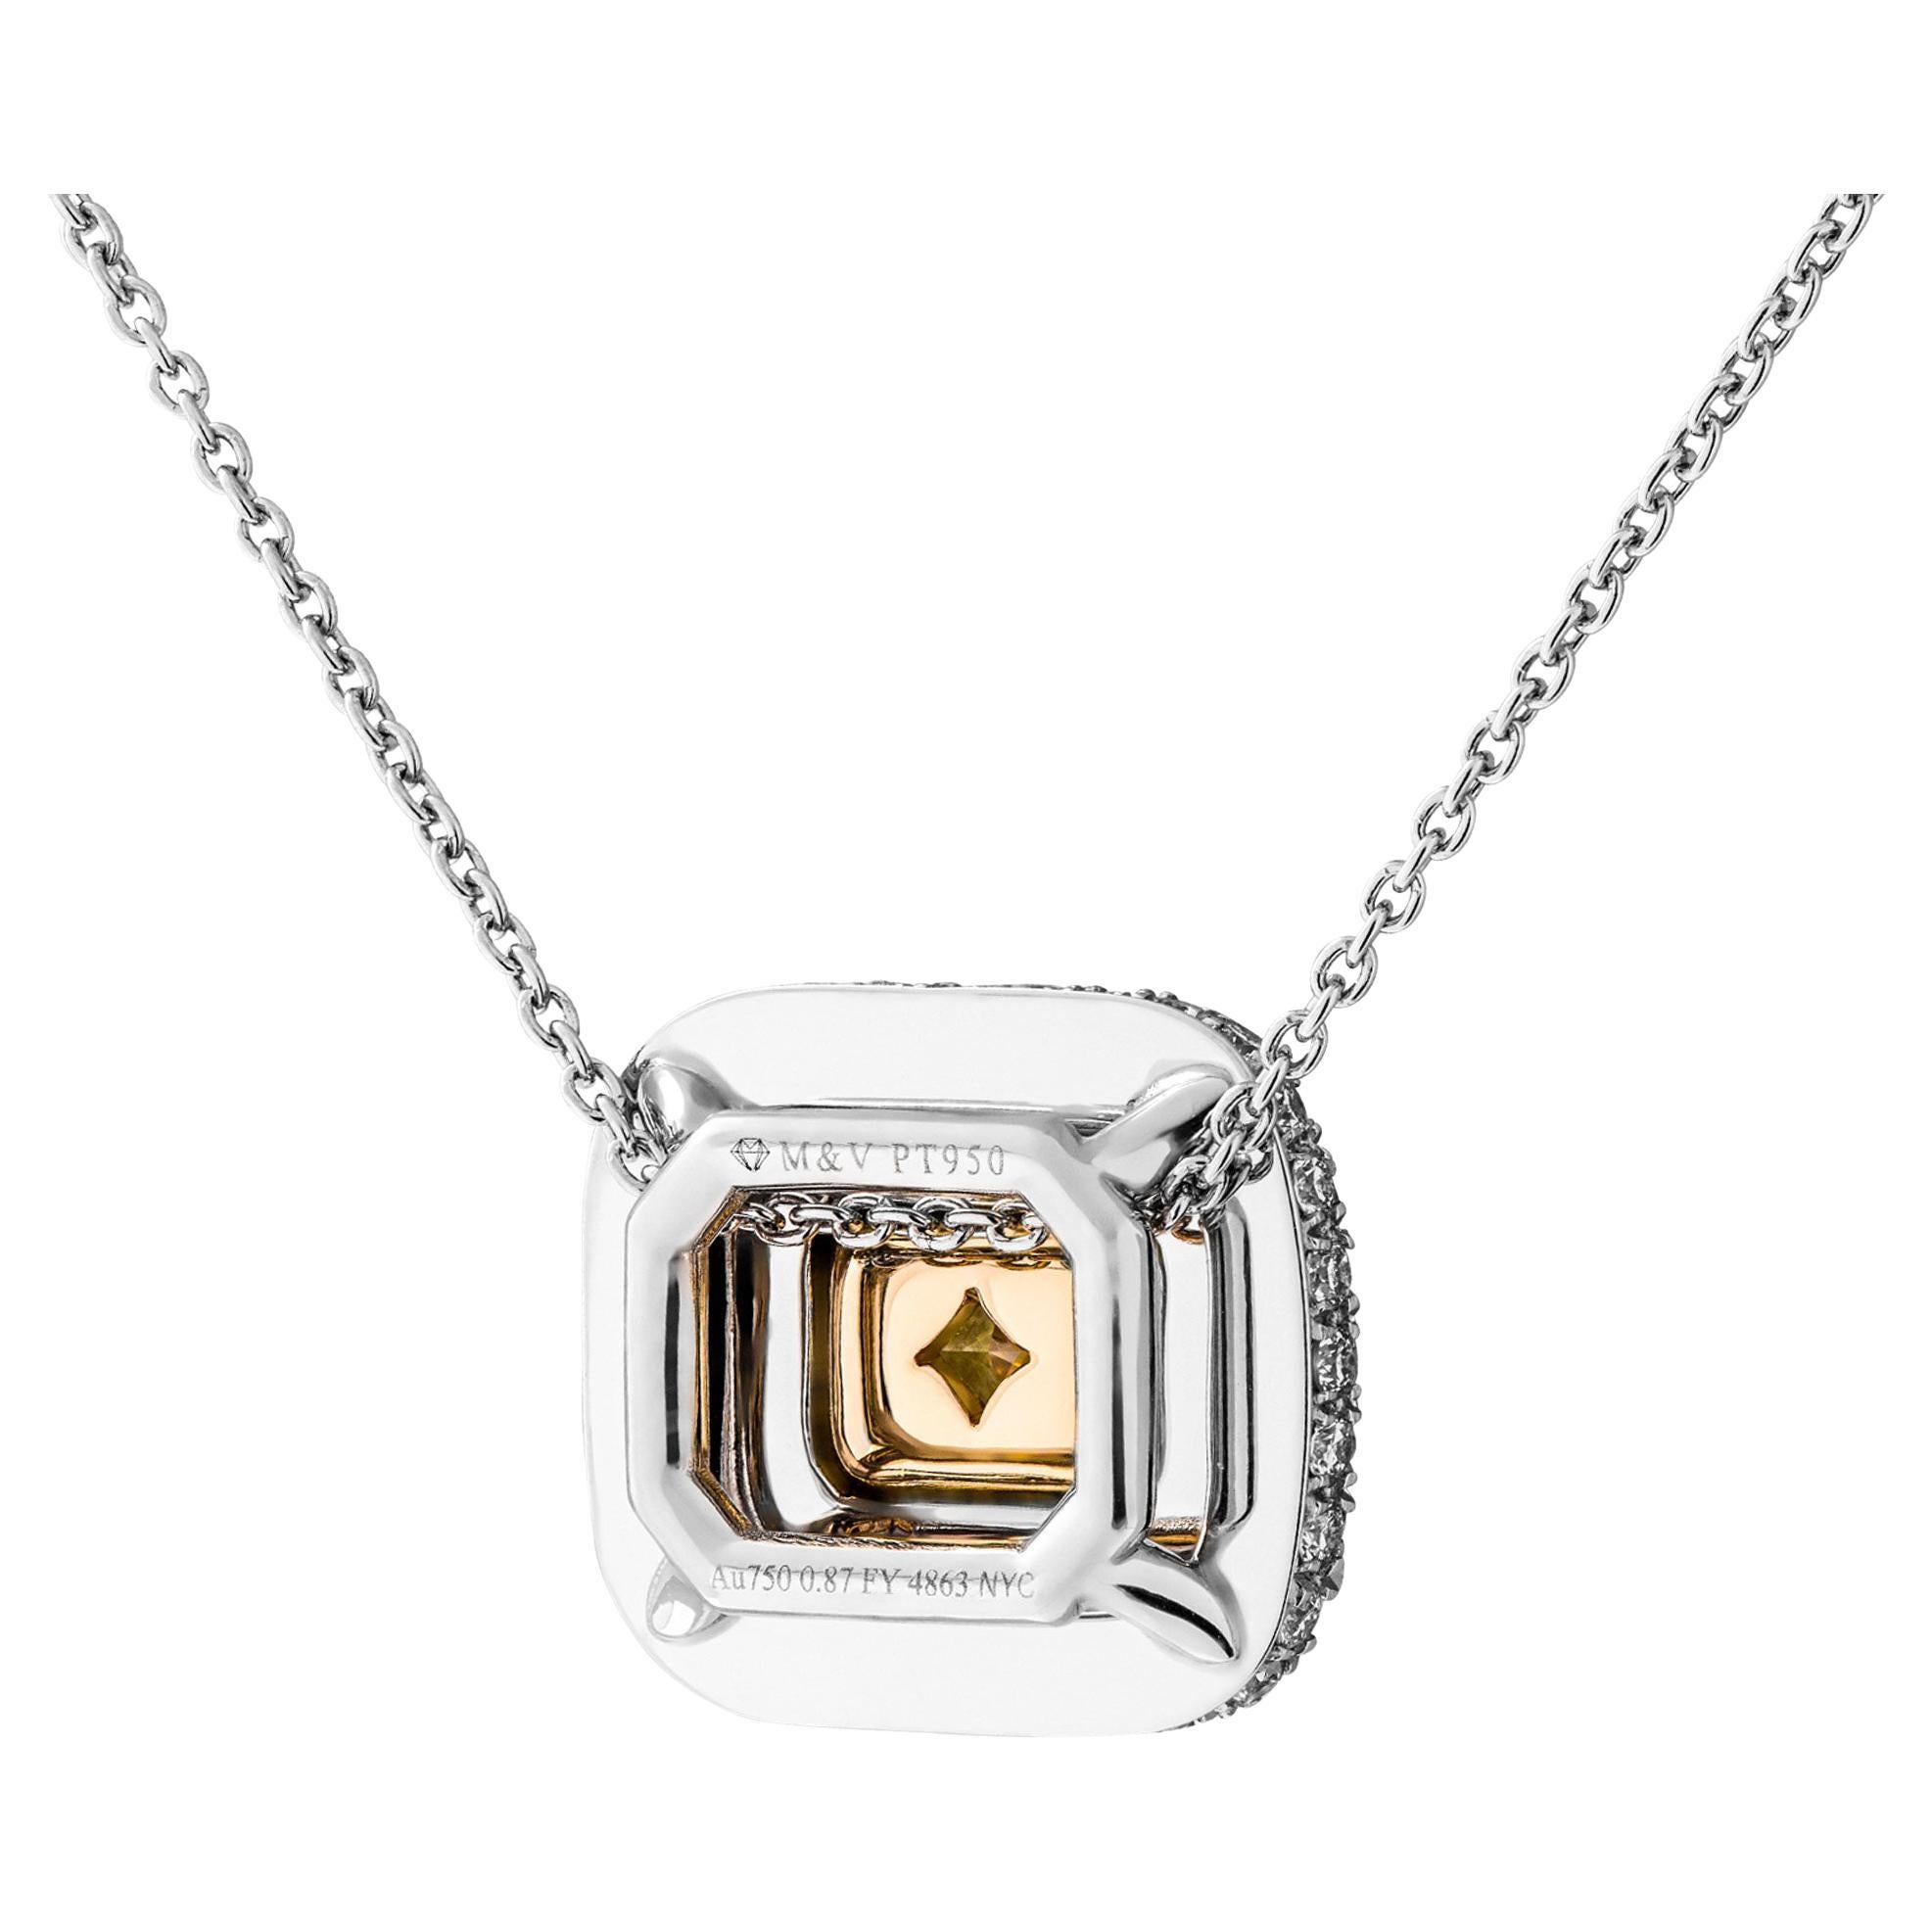 Double Halo Radiant Shaped Diamond Pendant 
This pendant features a 0.87ct Natural Fancy Yellow Even VS1 Radiant Shape GIA#5212856096 and is accented with 80 round brilliant cut diamonds totaling 0.47ct. 
The setting is made from Platinum & 18K